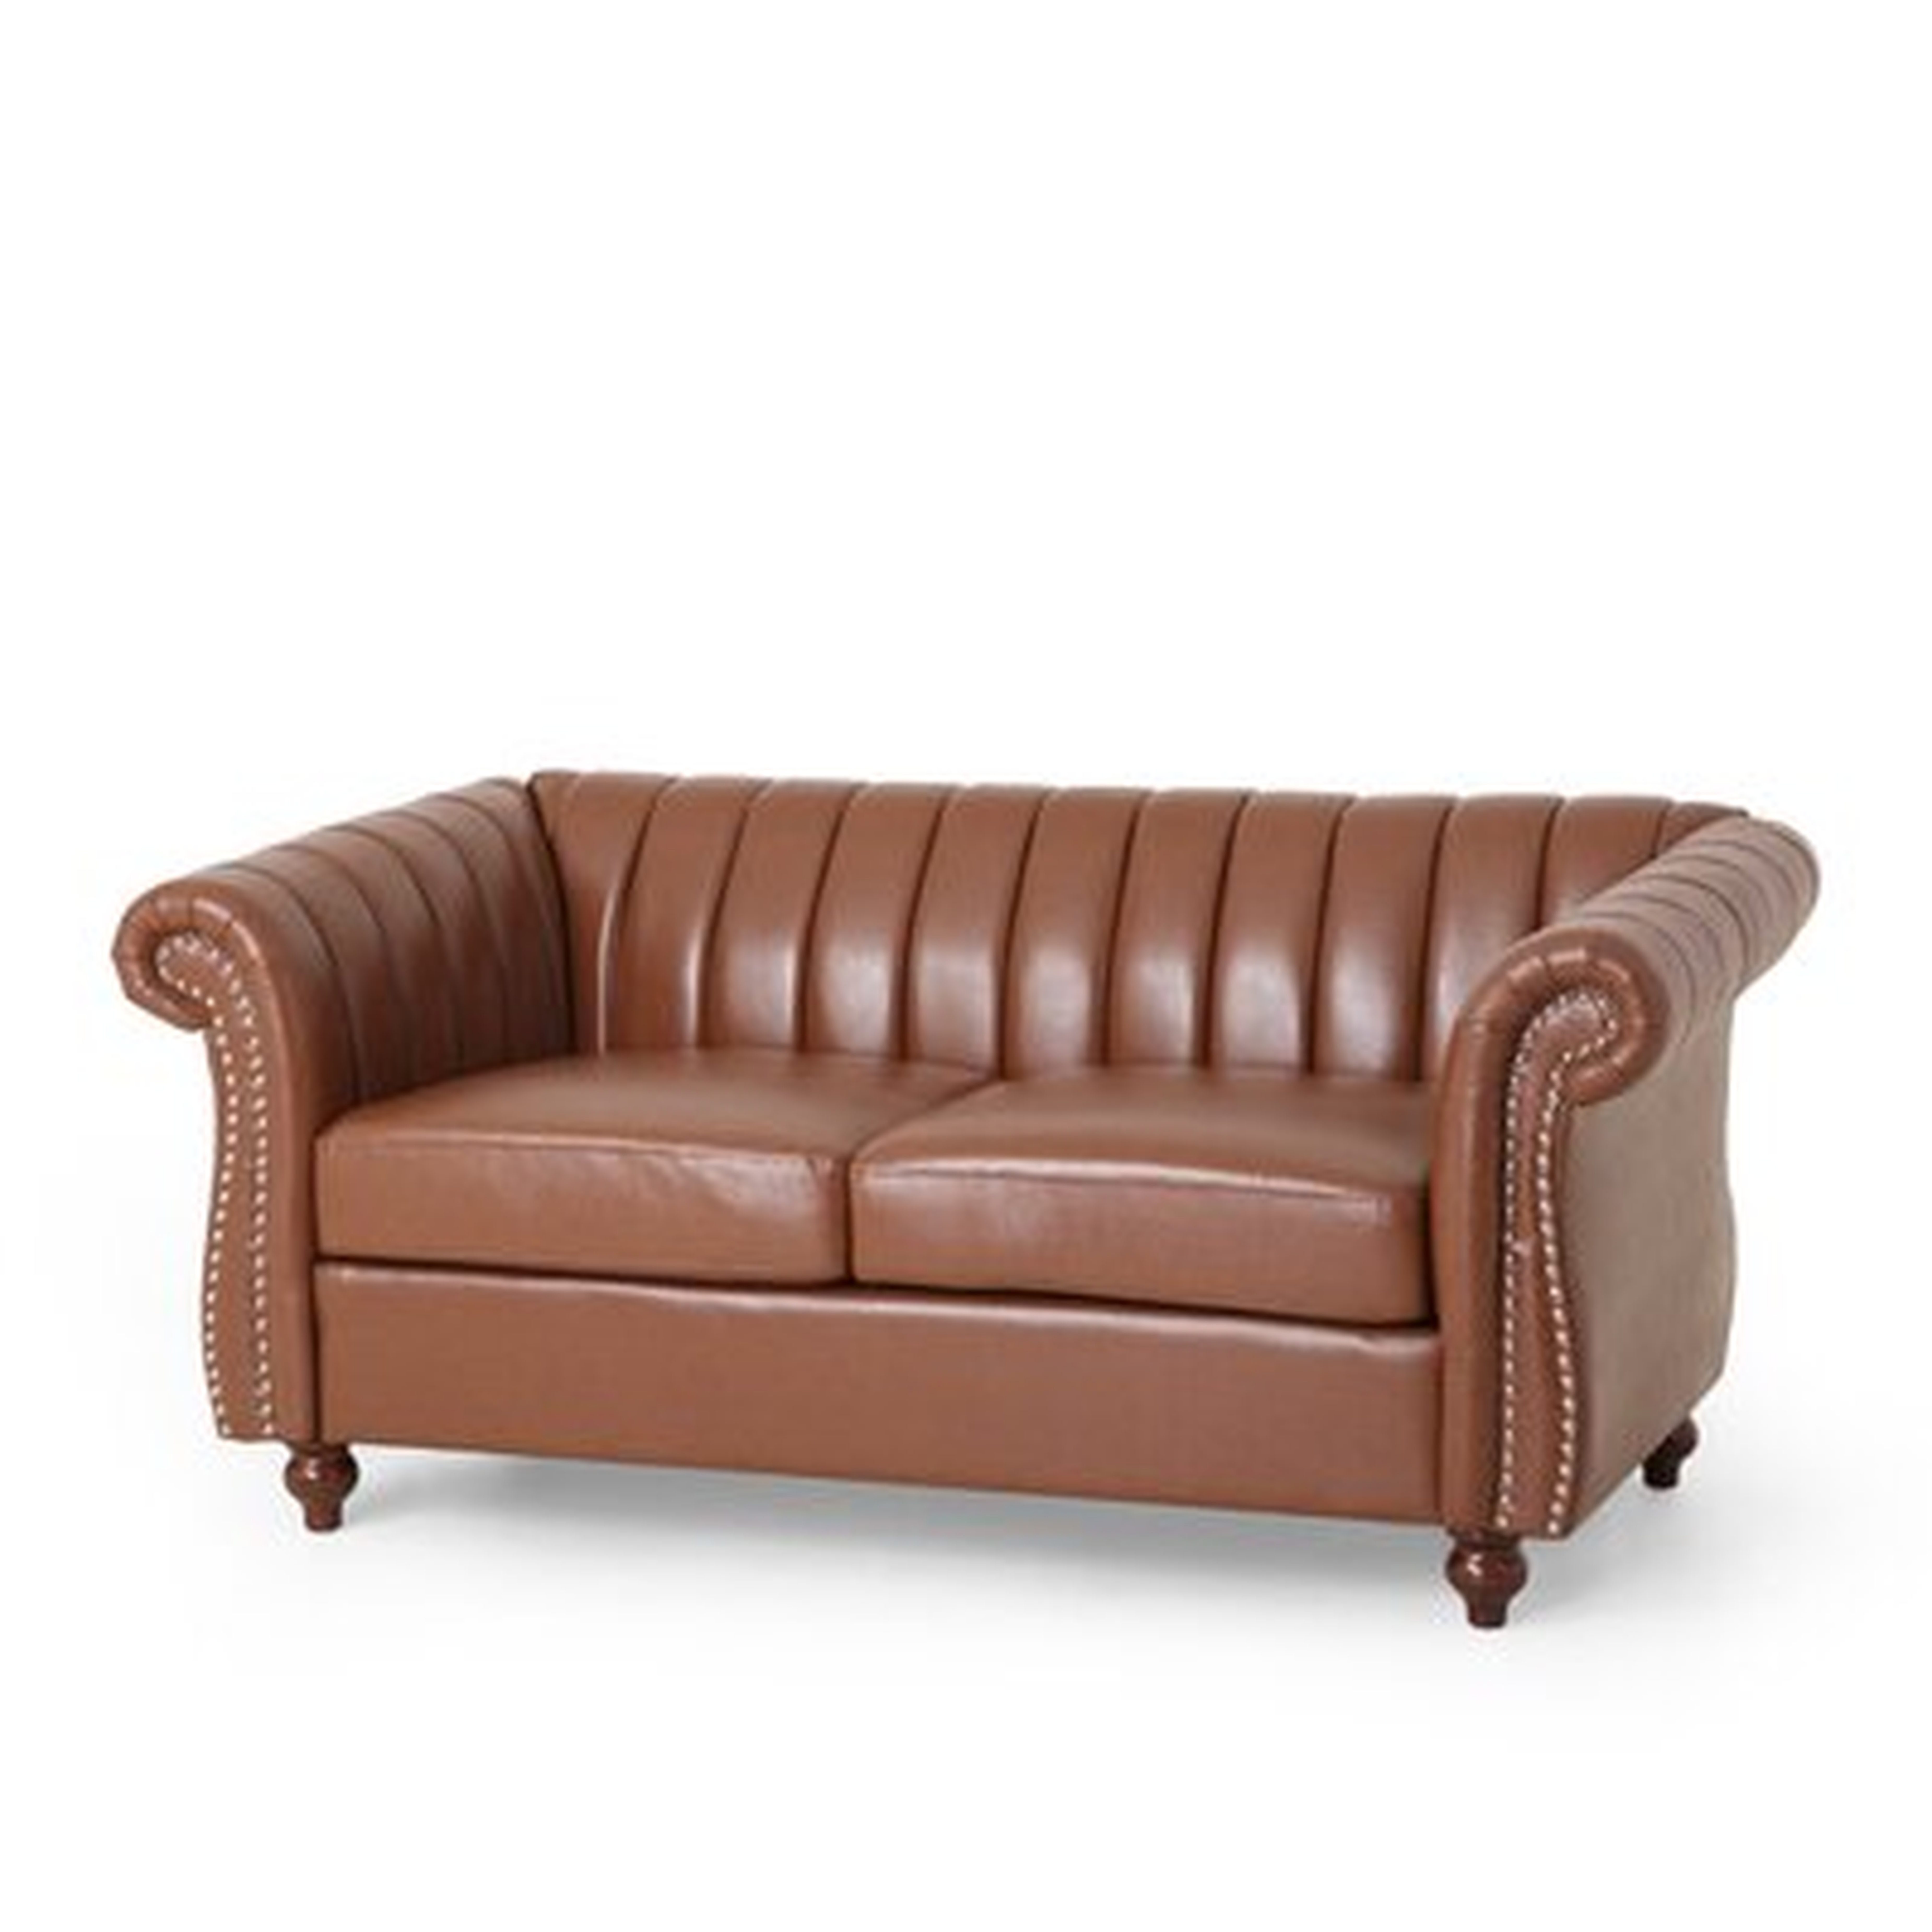 61.75" Wide Faux Leather Rolled Arm Loveseat - Wayfair